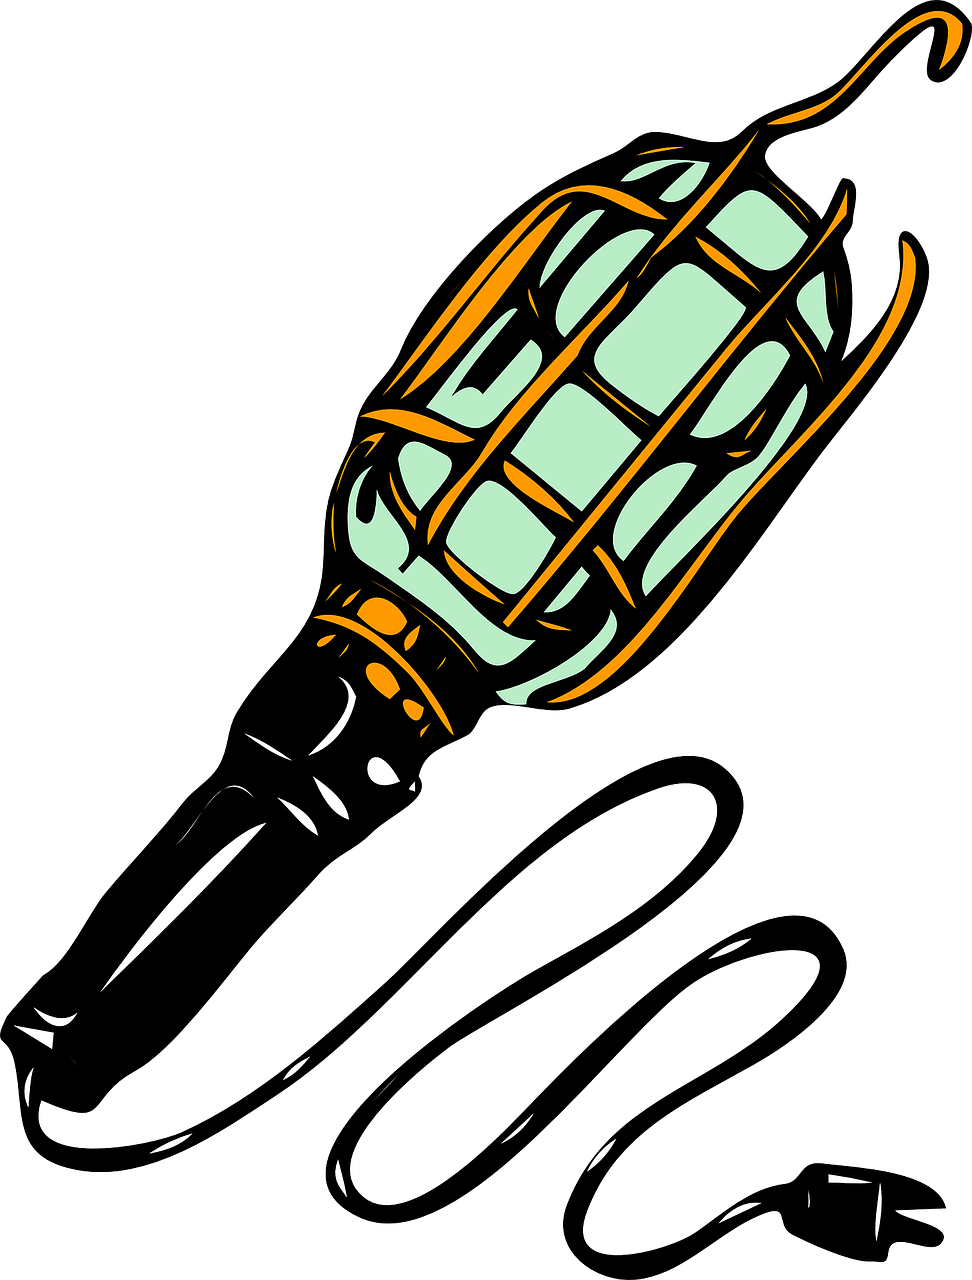 a close up of a microphone on a black background, concept art, graffiti, style of jet set radio, torchlight. sketch art. roots, flat color, bioshock big daddy